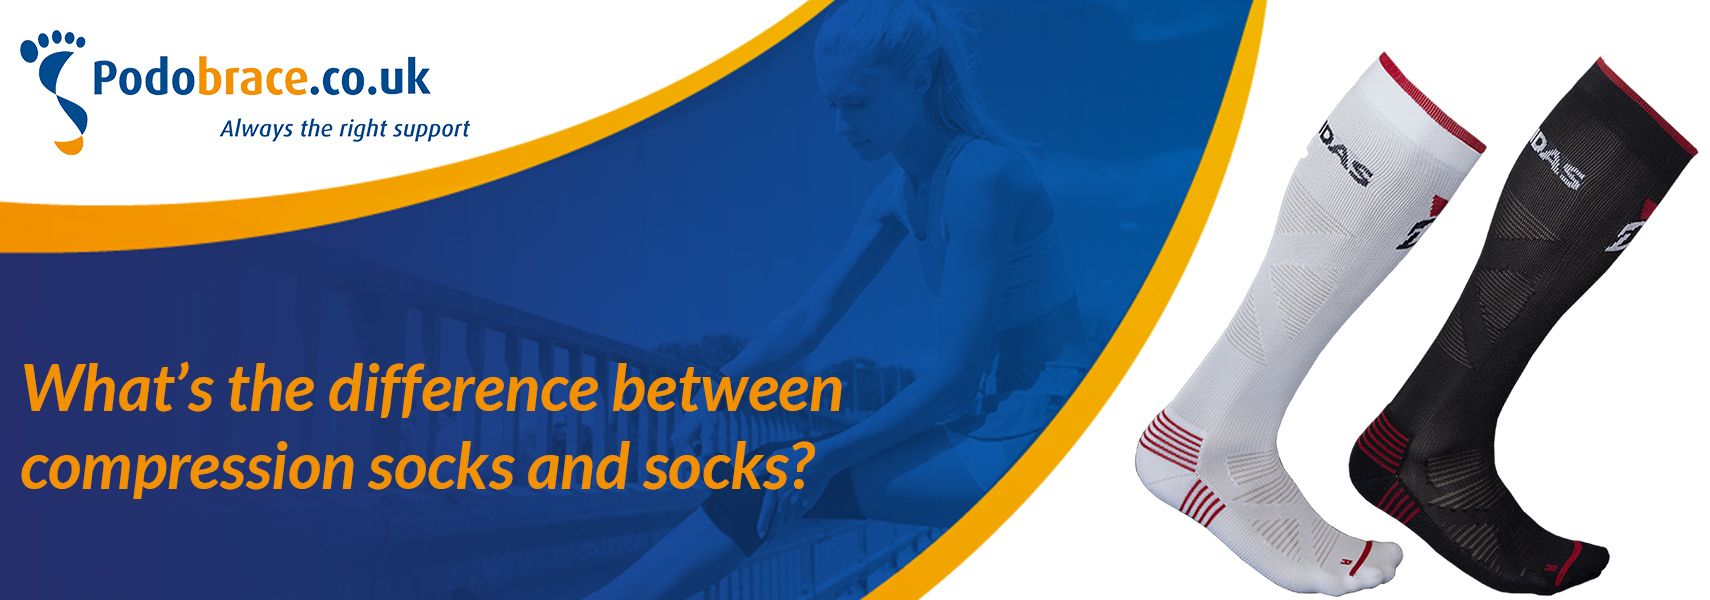 What's the difference between compression socks and socks